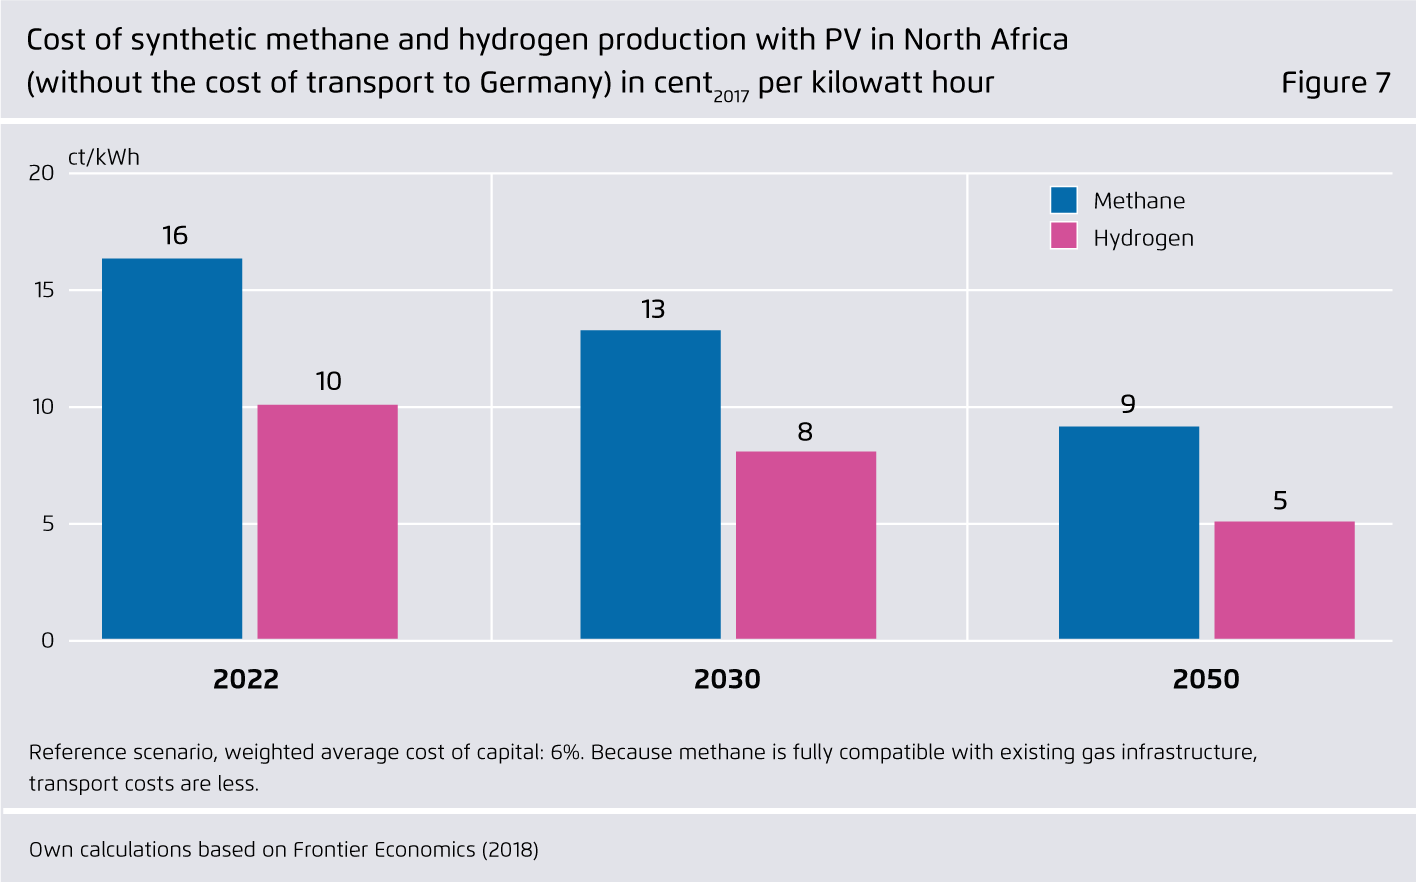 Preview for Cost of synthetic methane and hydrogen production with PV in North Africa (without the cost of transport to Germany) in cent2017 per kilowatt hour